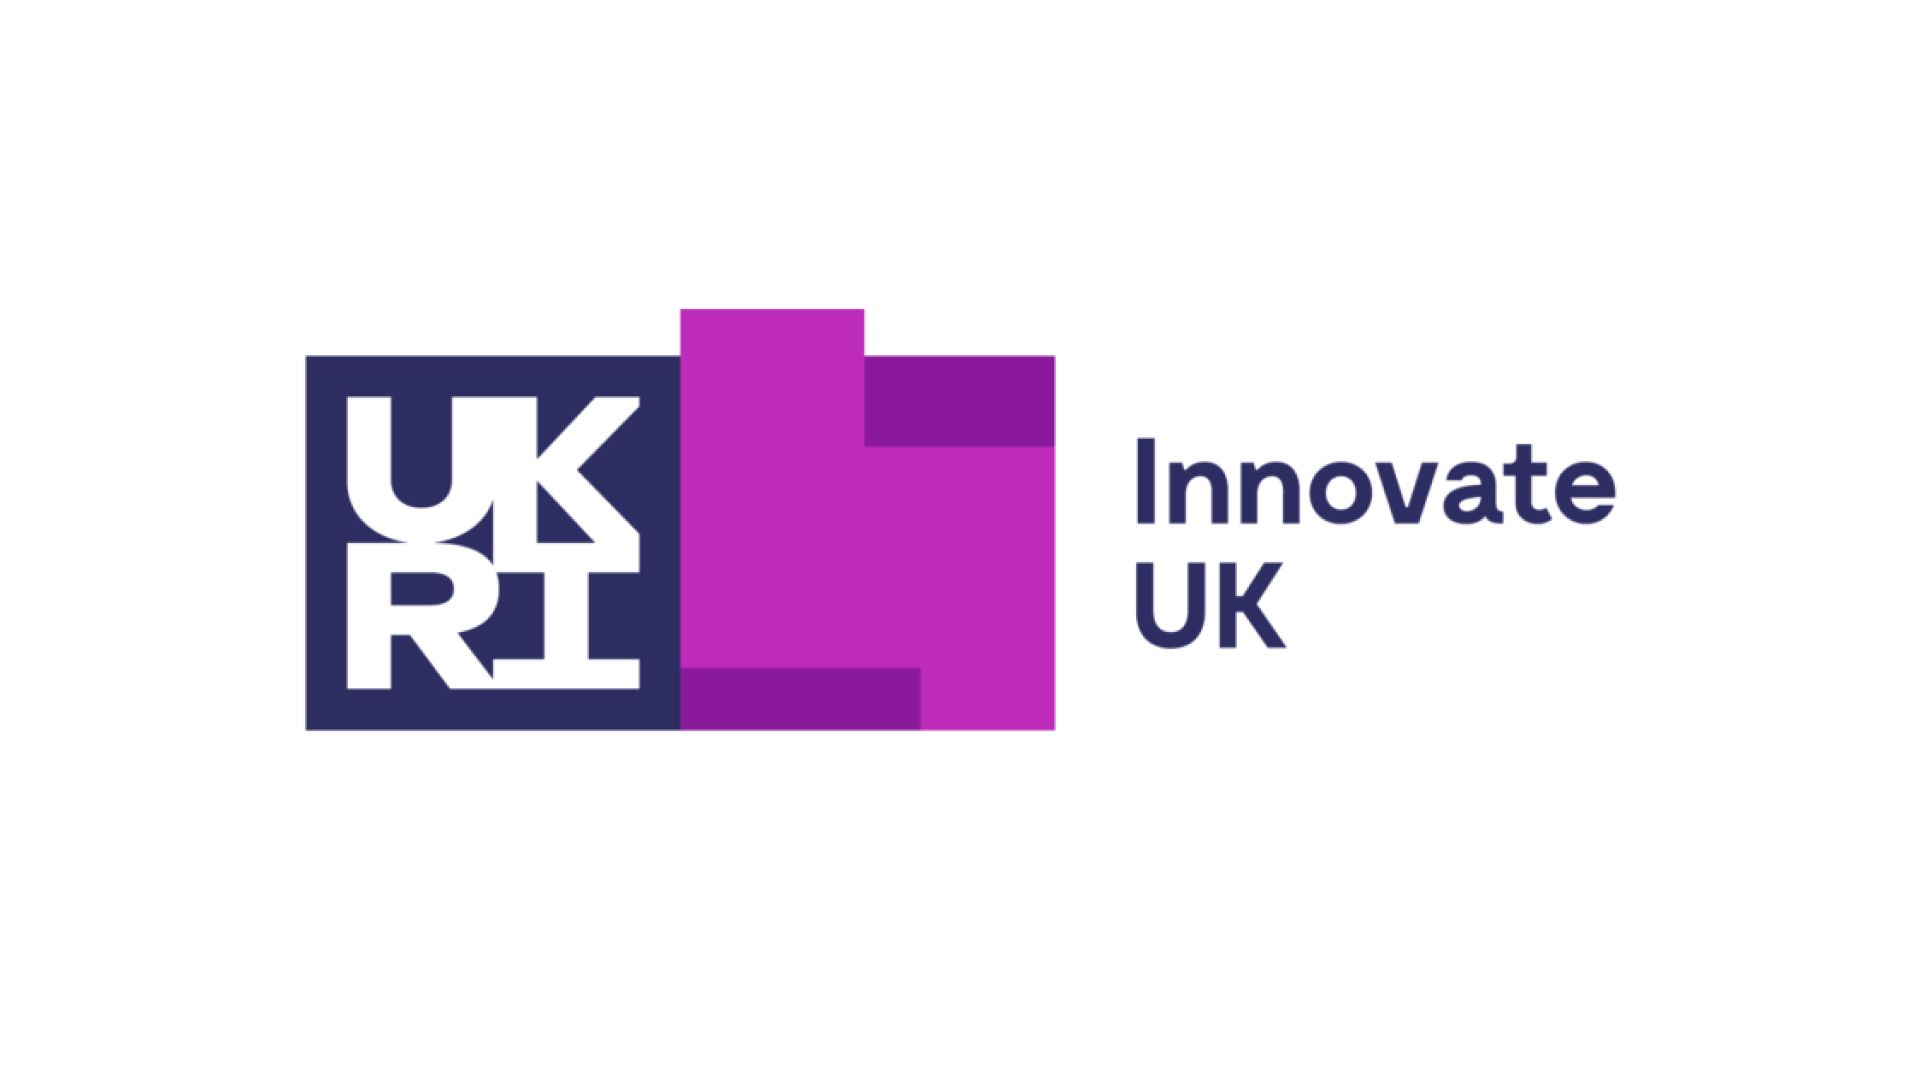 the logo for innovate uk is purple and blue .